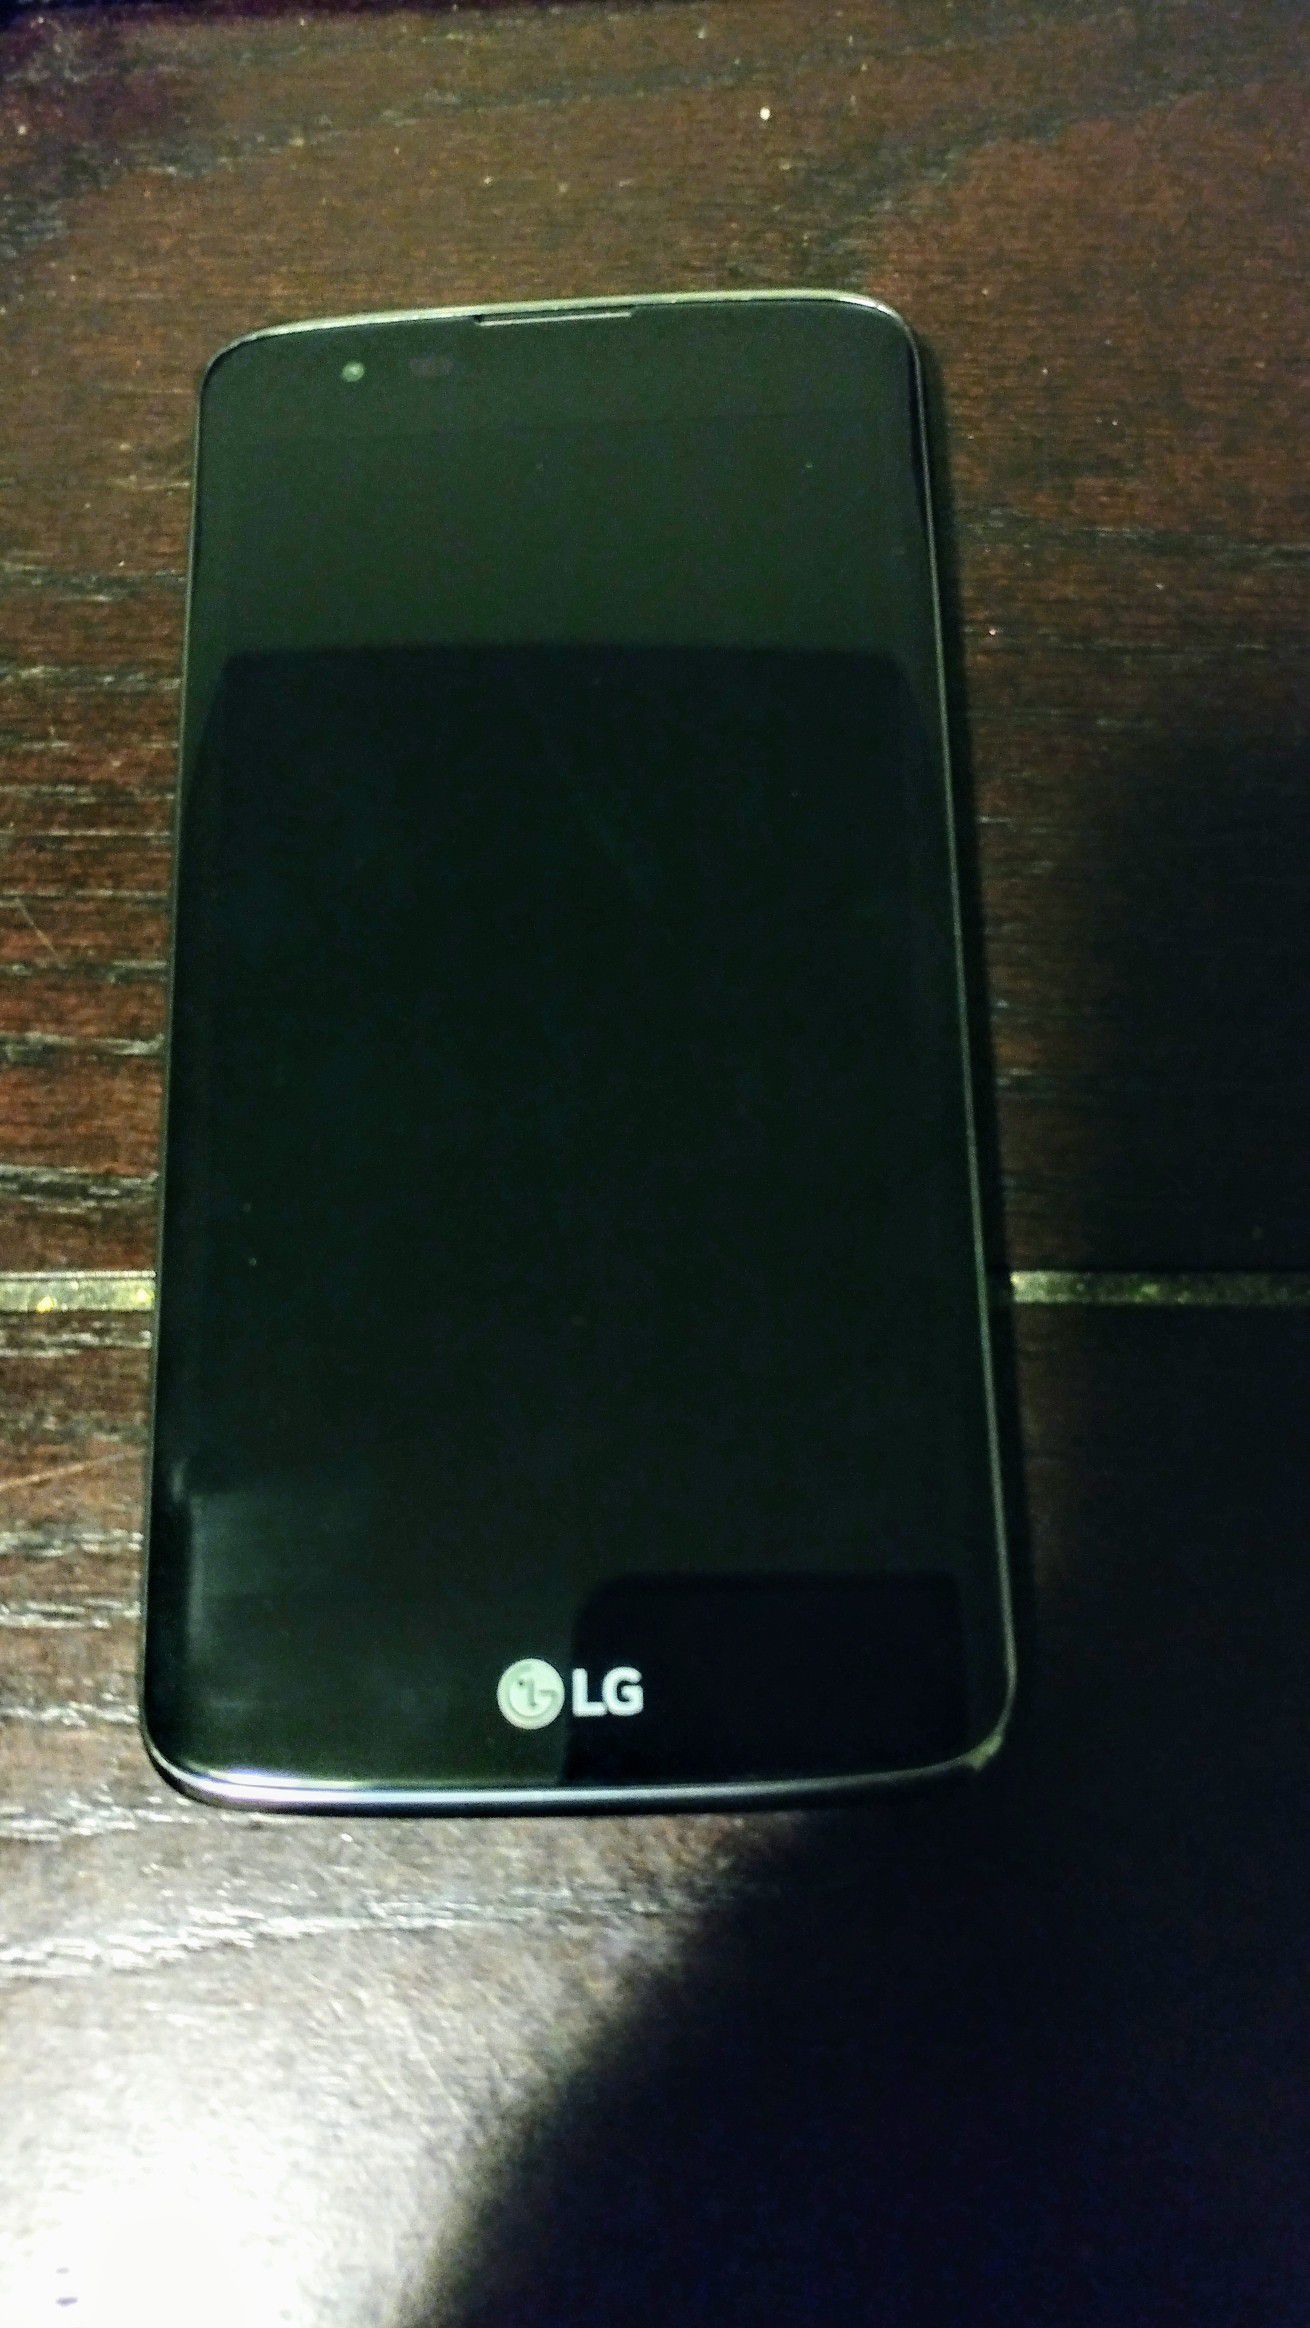 Lg K7 in good condition for use with T Mobile network